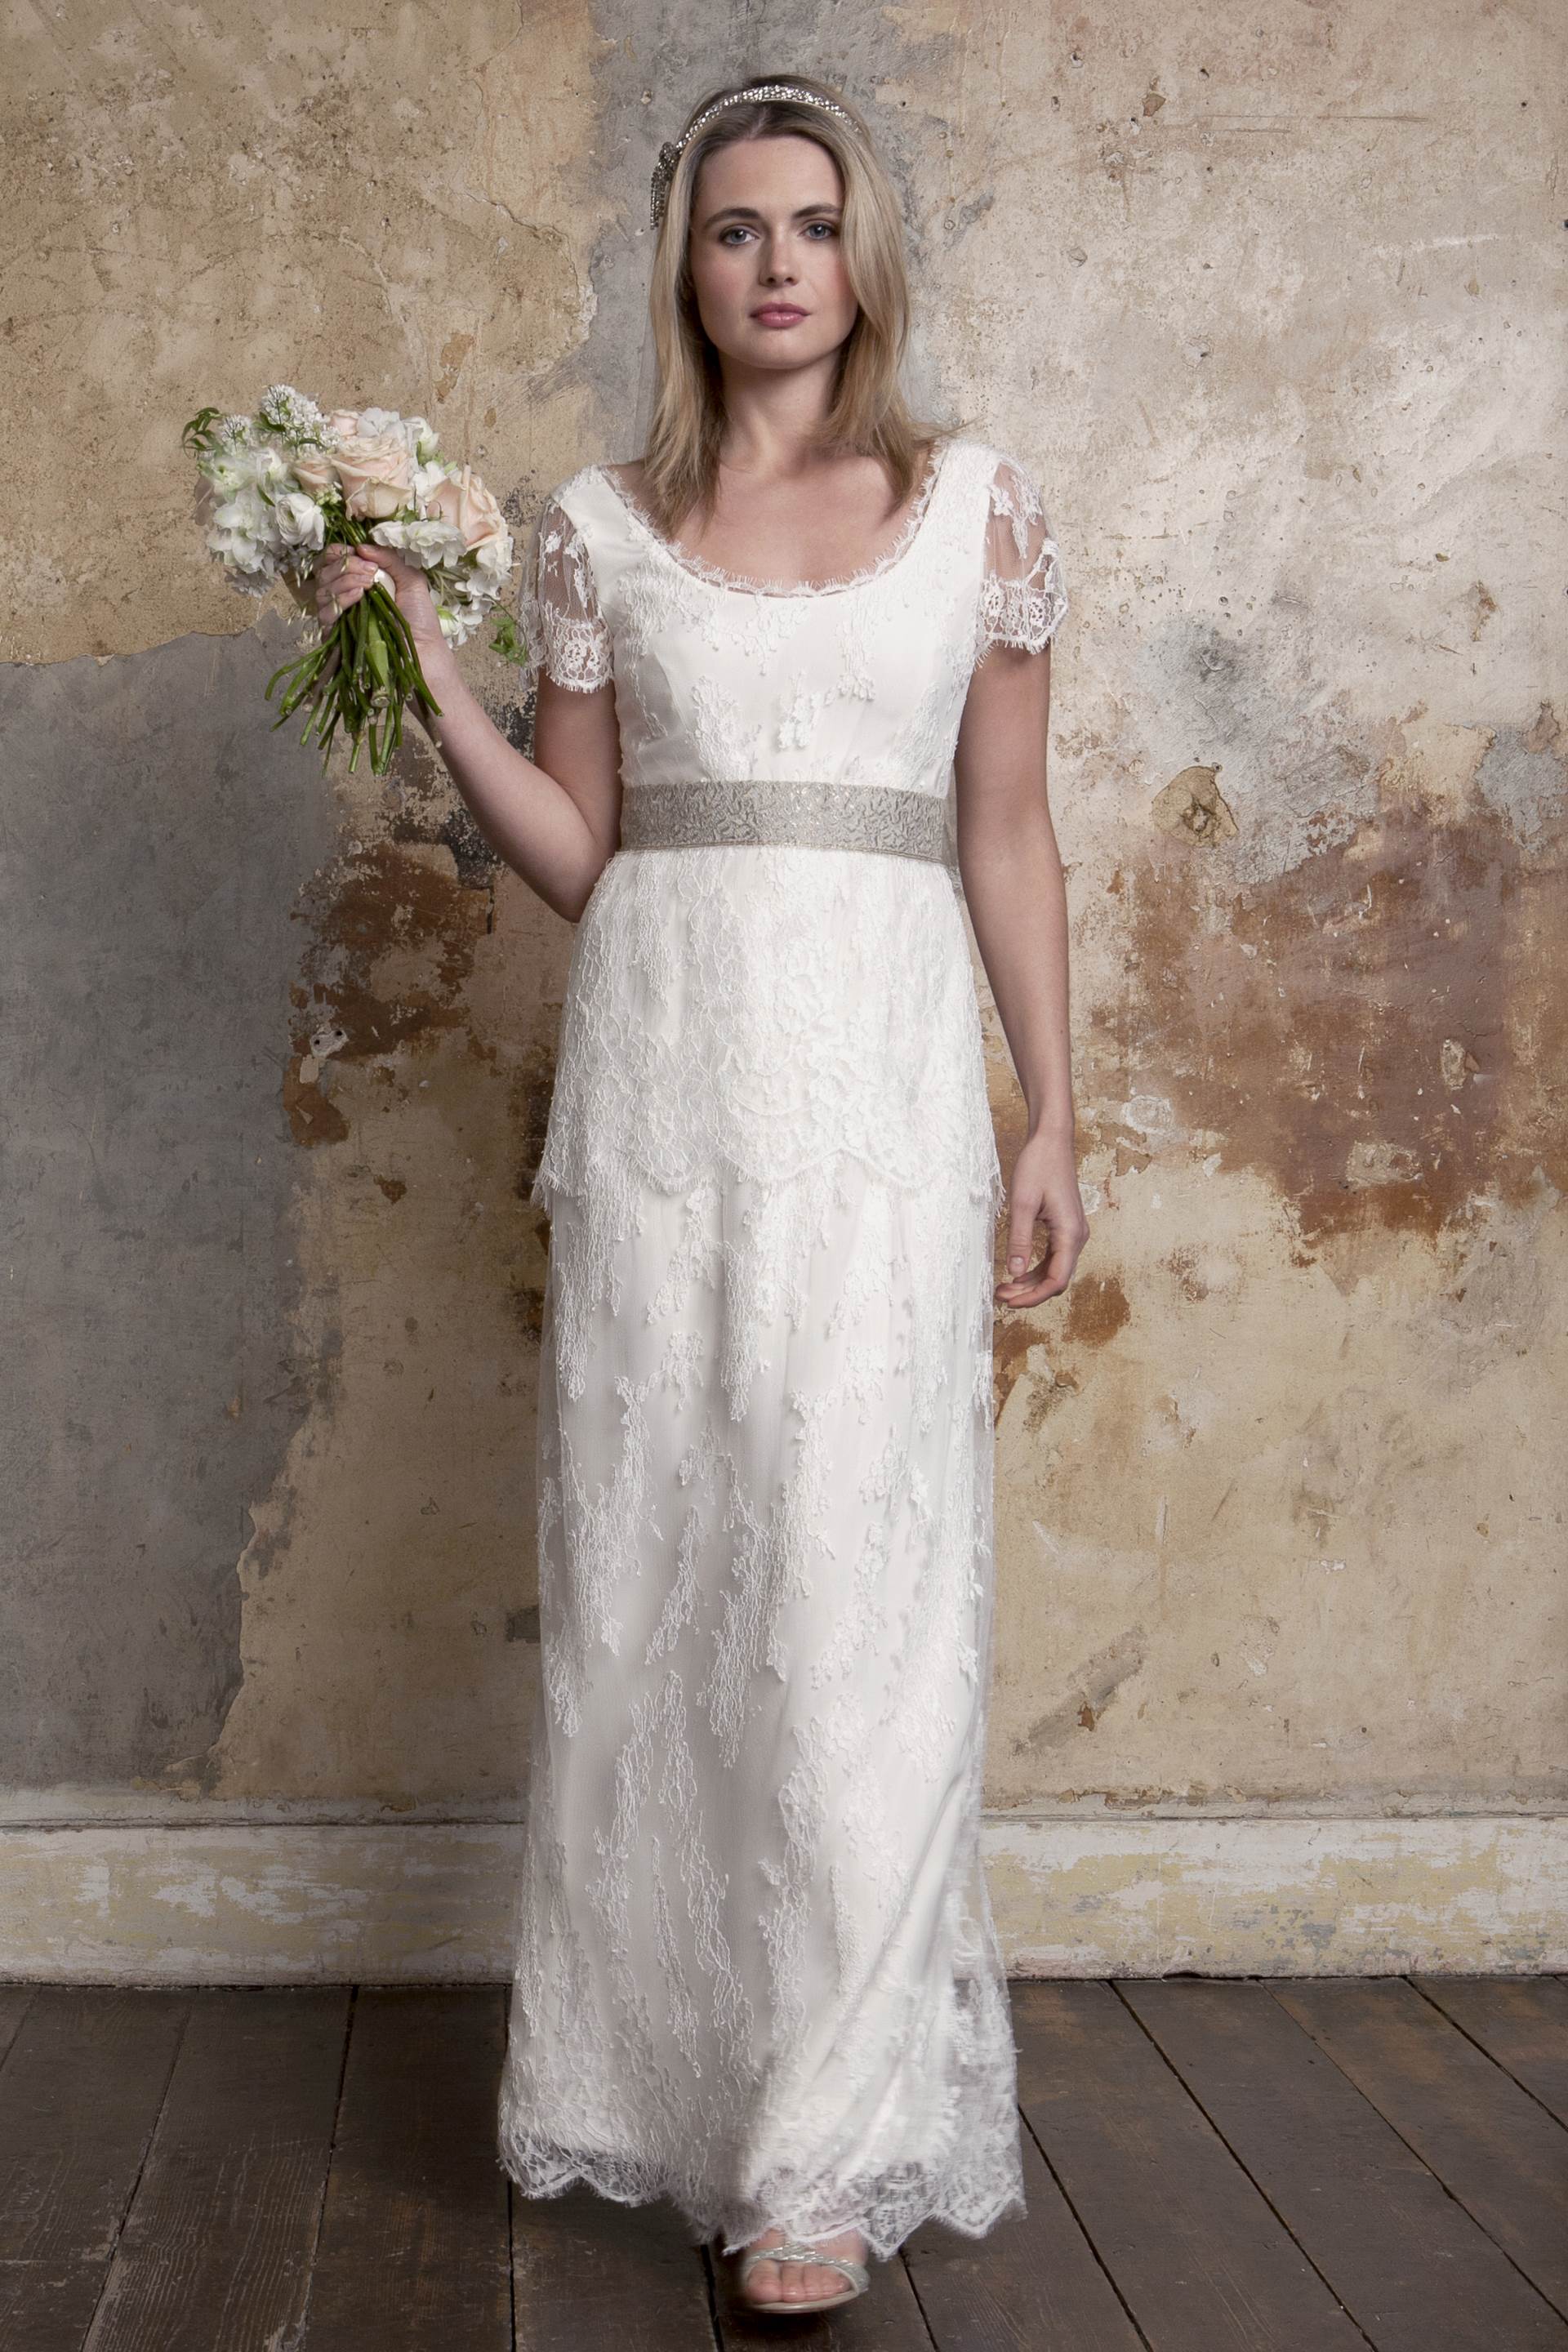 Bea by Sally Lacock as featured on The National Vintage Wedding Fair blog